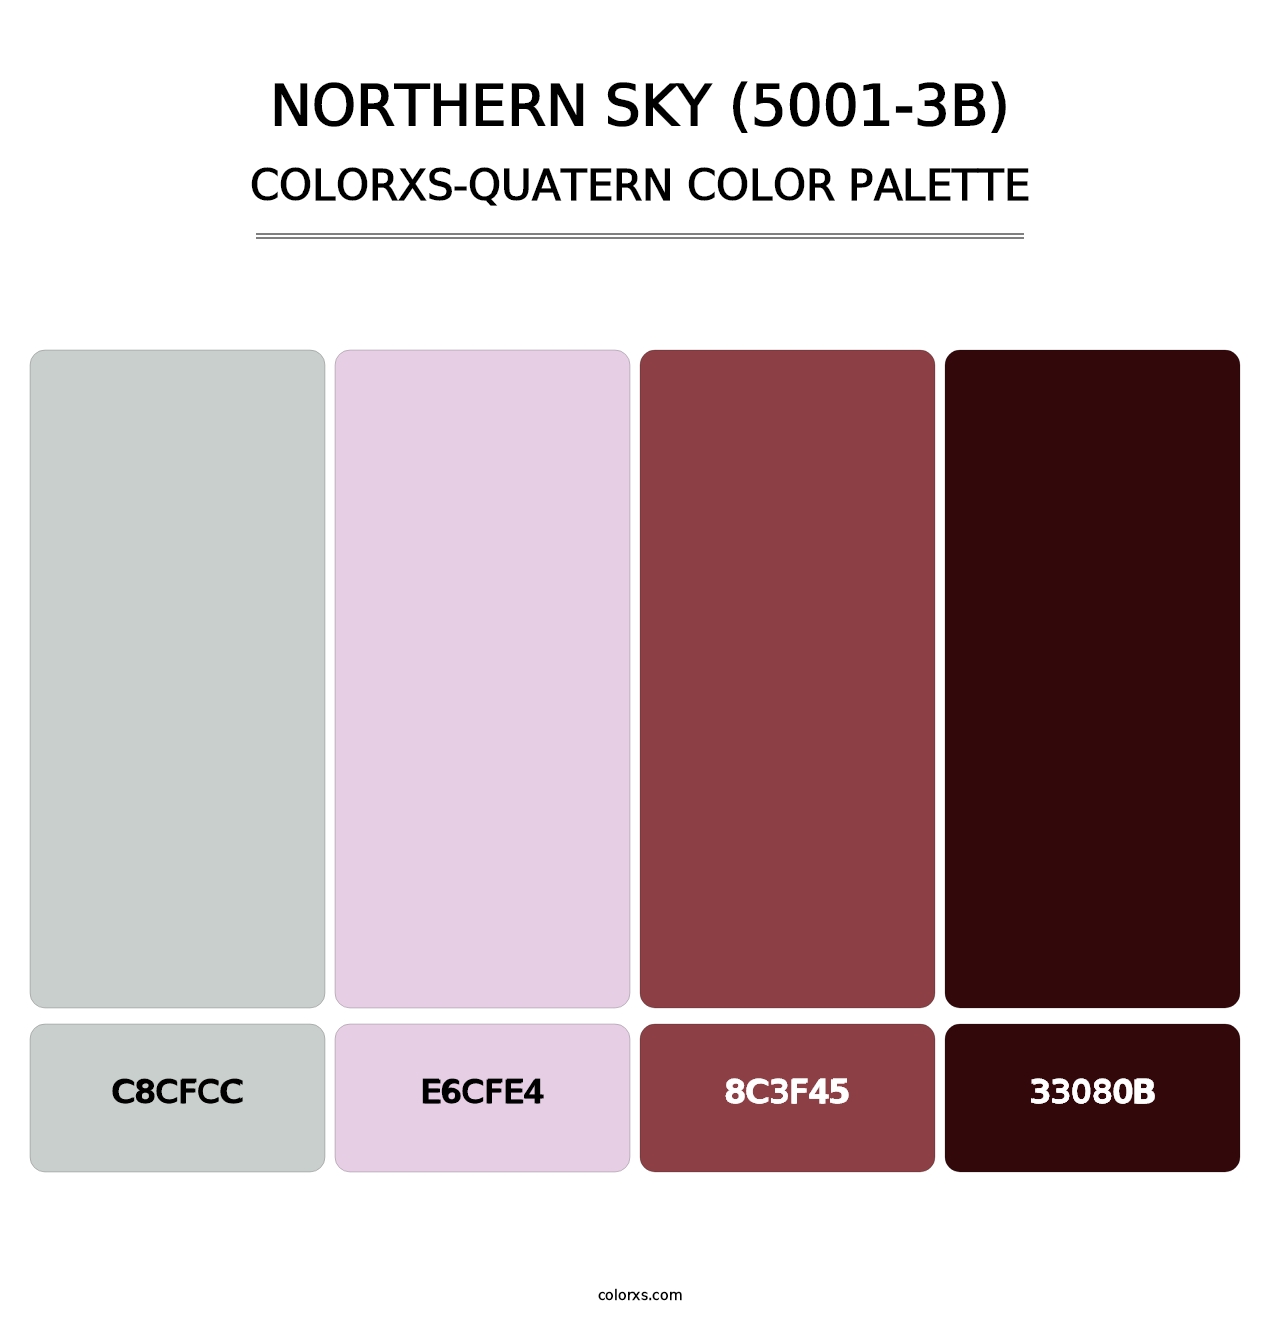 Northern Sky (5001-3B) - Colorxs Quatern Palette